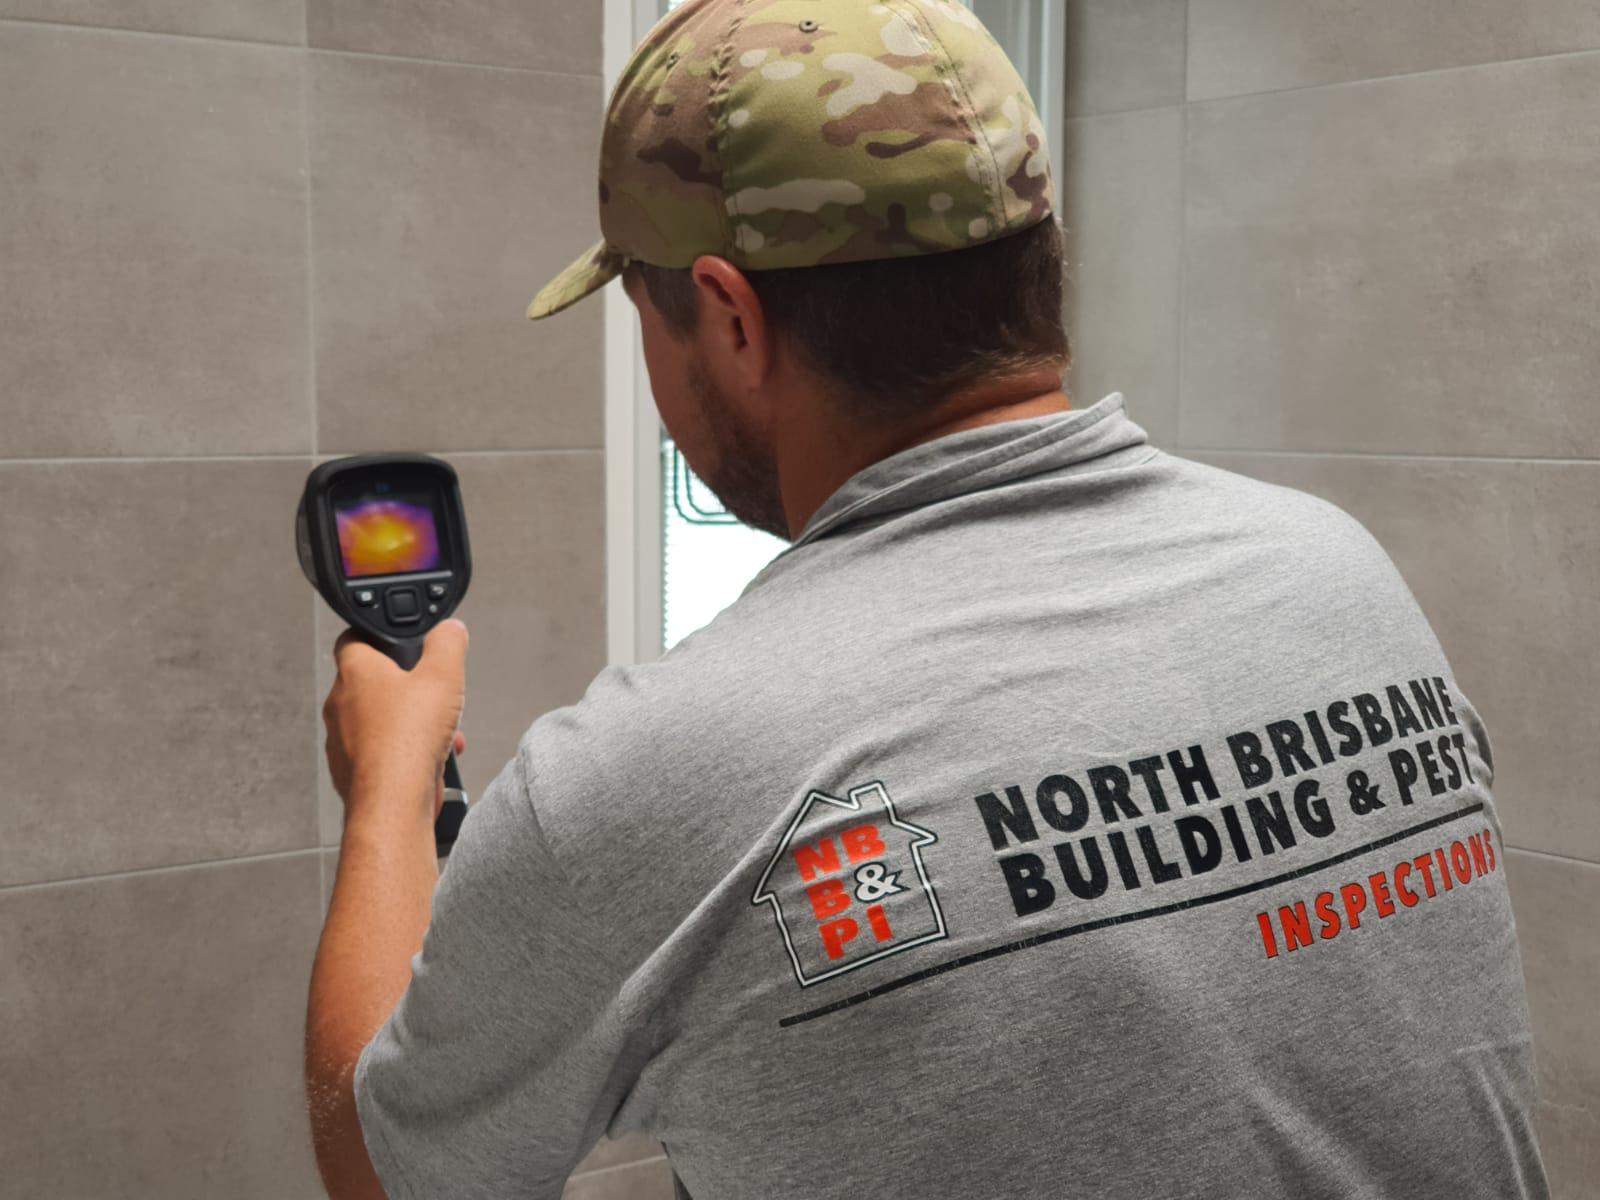 Brett is in the shower using the thermal imaging cameras to detect moisture